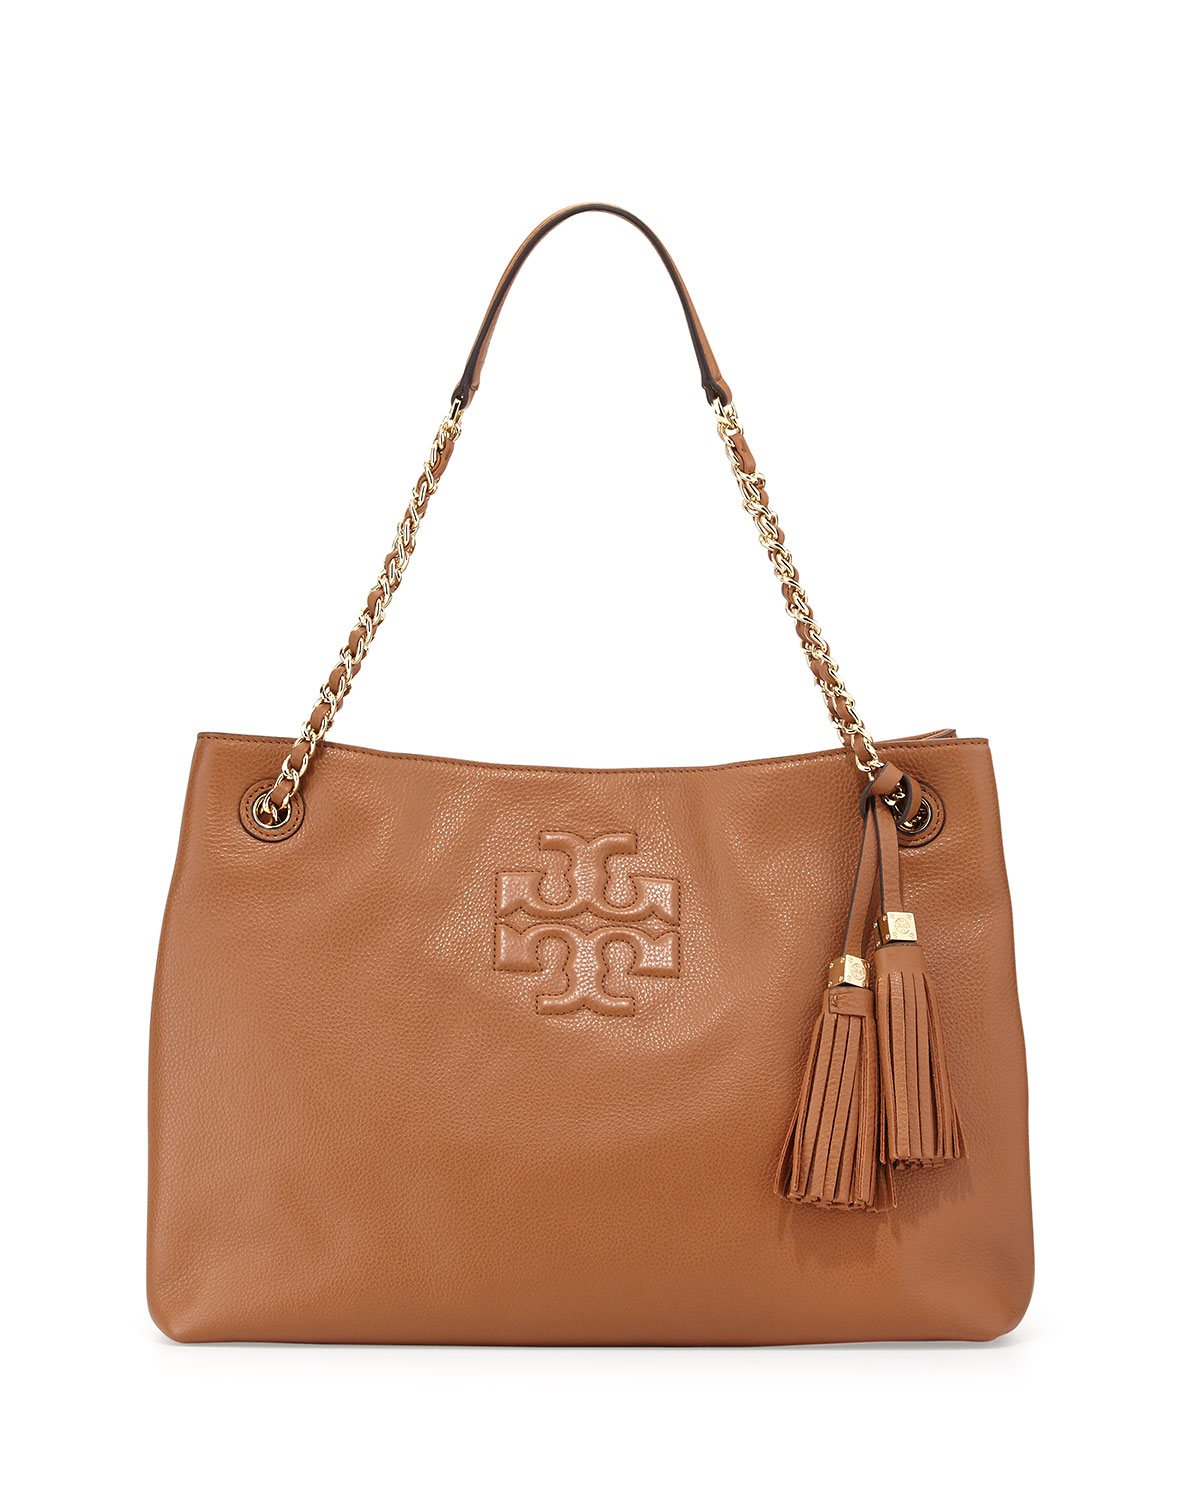 Tory Burch Thea Large Chain Tote Bag in Brown (BARK) | Lyst